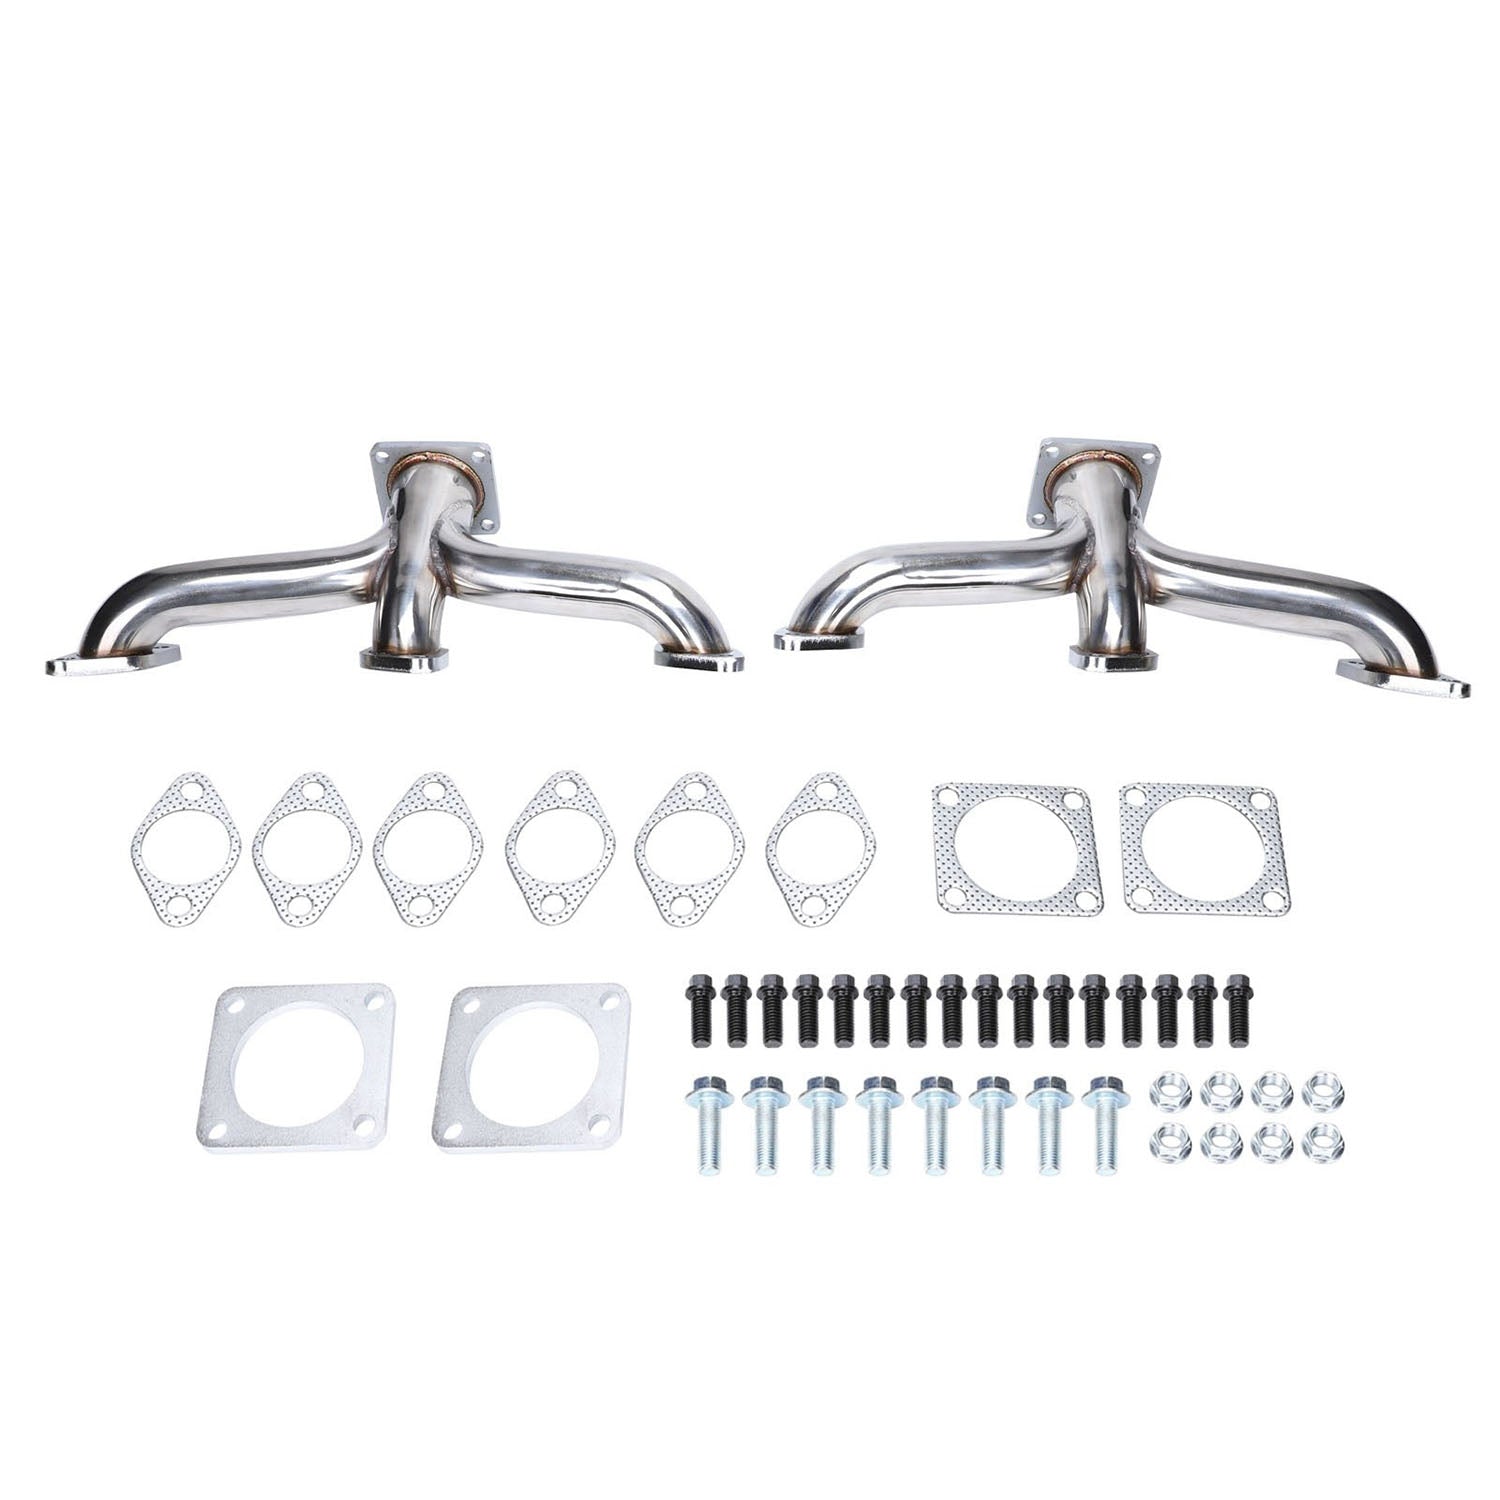 Exhaust Manifold Headers for 1932-1953 Ford Flathead V8 Car Pickup Truck Shorty Stainless Steel